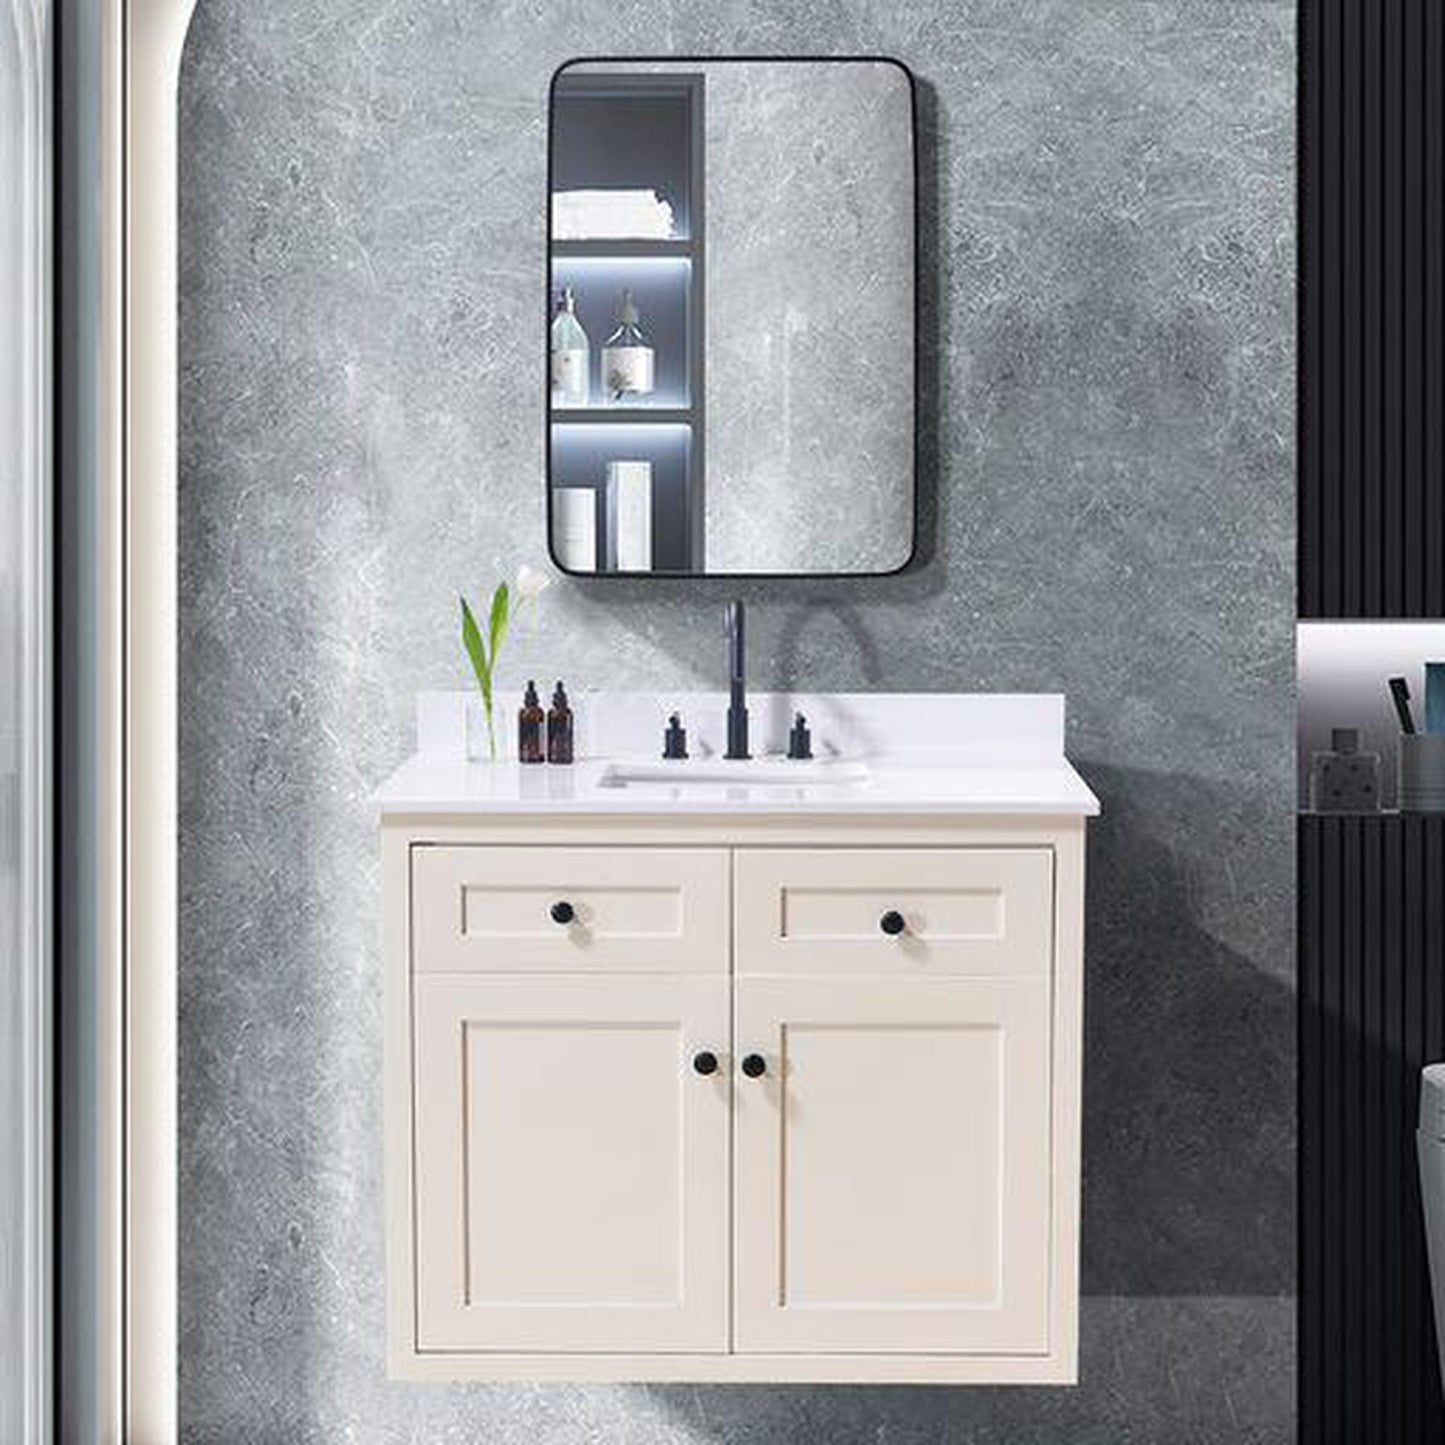 Altair Andalo 43" x 22" Snow White Composite Stone Bathroom Vanity Top With White SInk